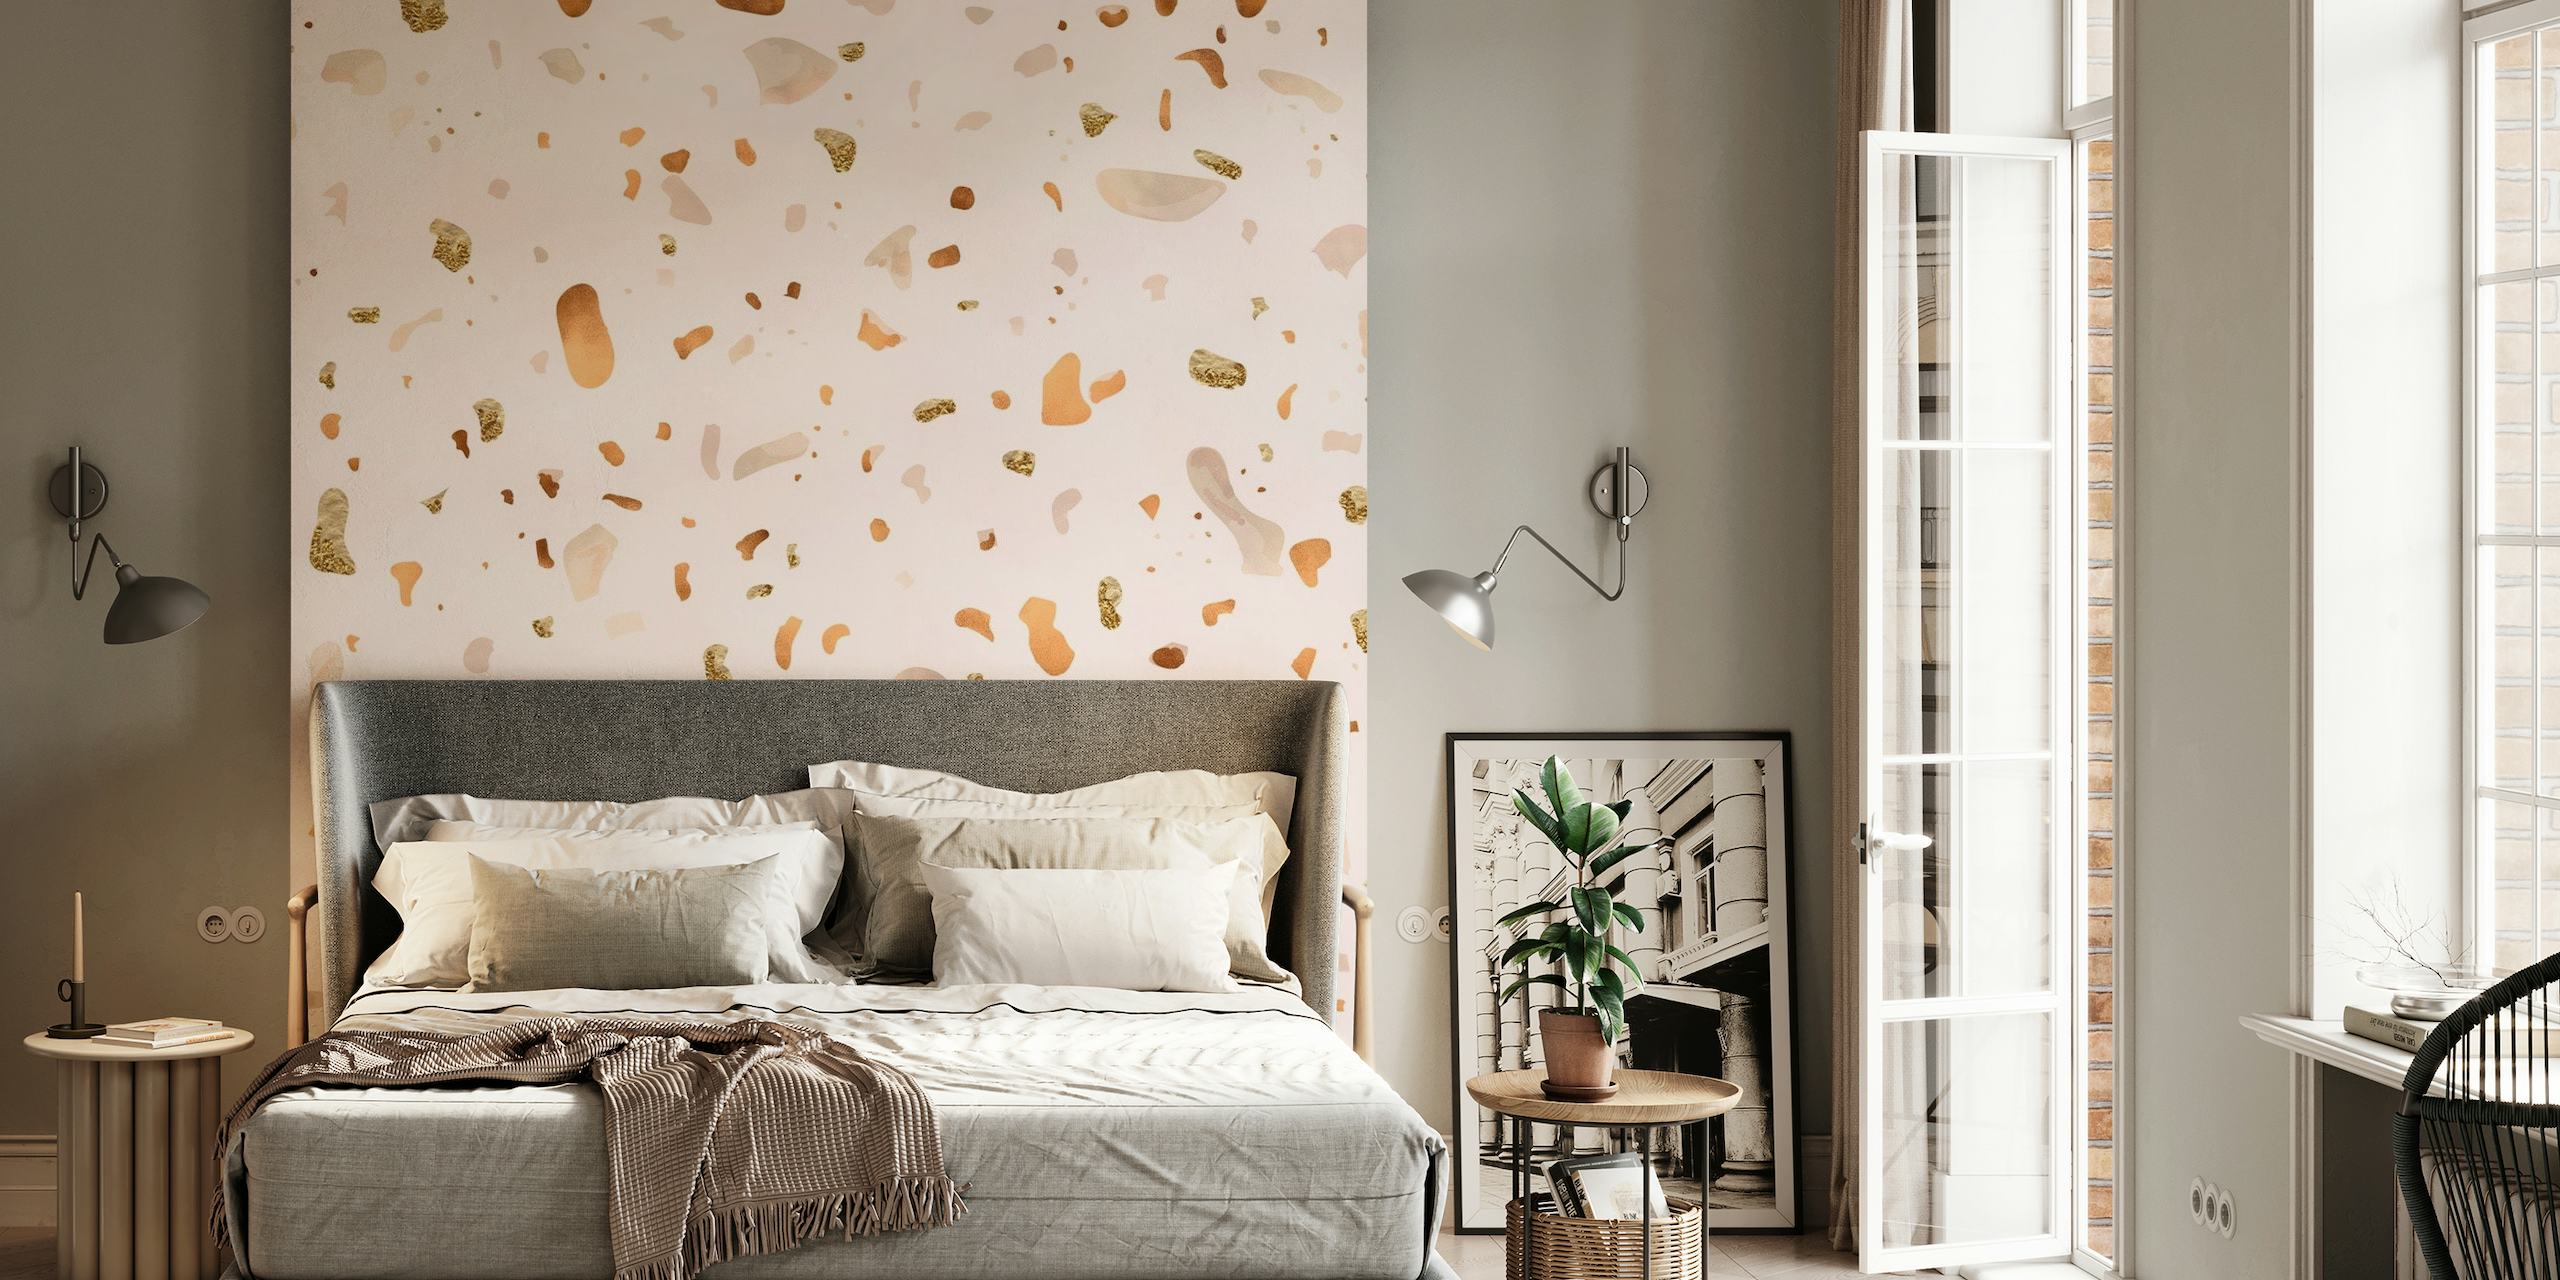 Blush pink terrazzo pattern with gold and copper accents wall mural